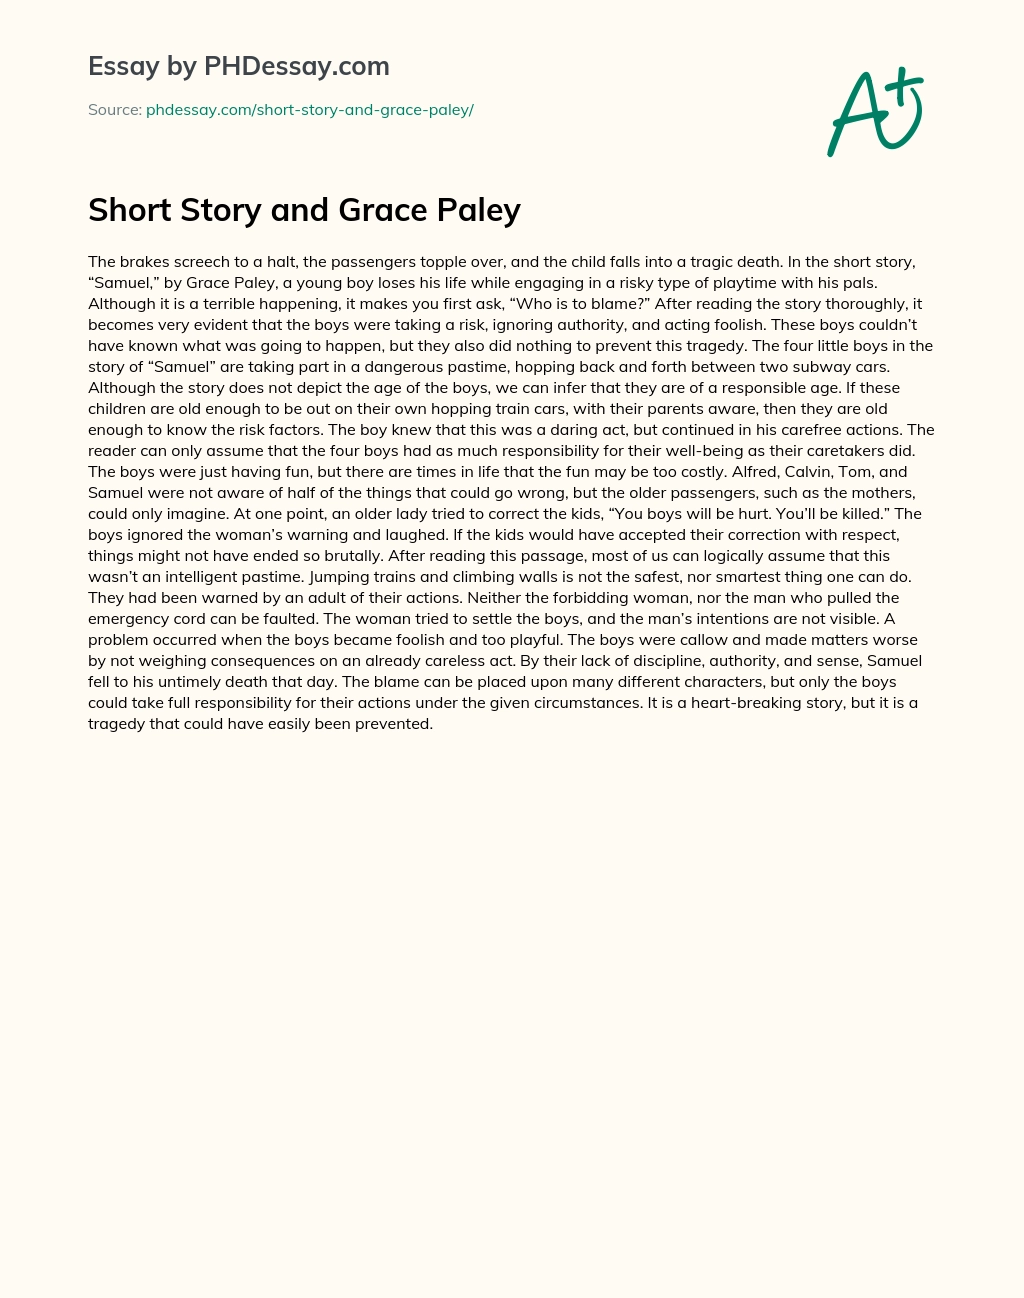 Short Story And Grace Paley Phdessay 